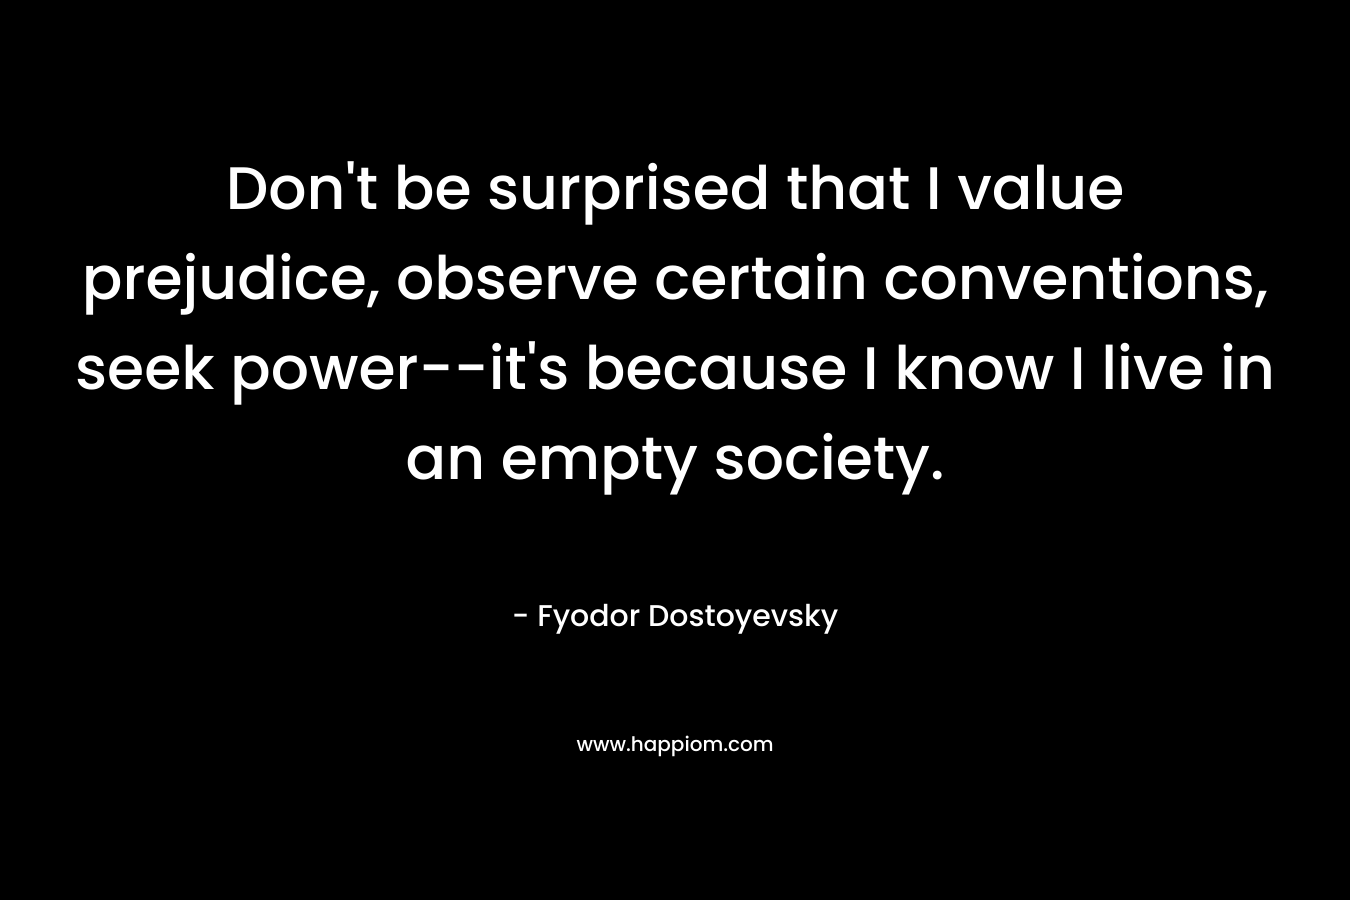 Don’t be surprised that I value prejudice, observe certain conventions, seek power–it’s because I know I live in an empty society. – Fyodor Dostoyevsky